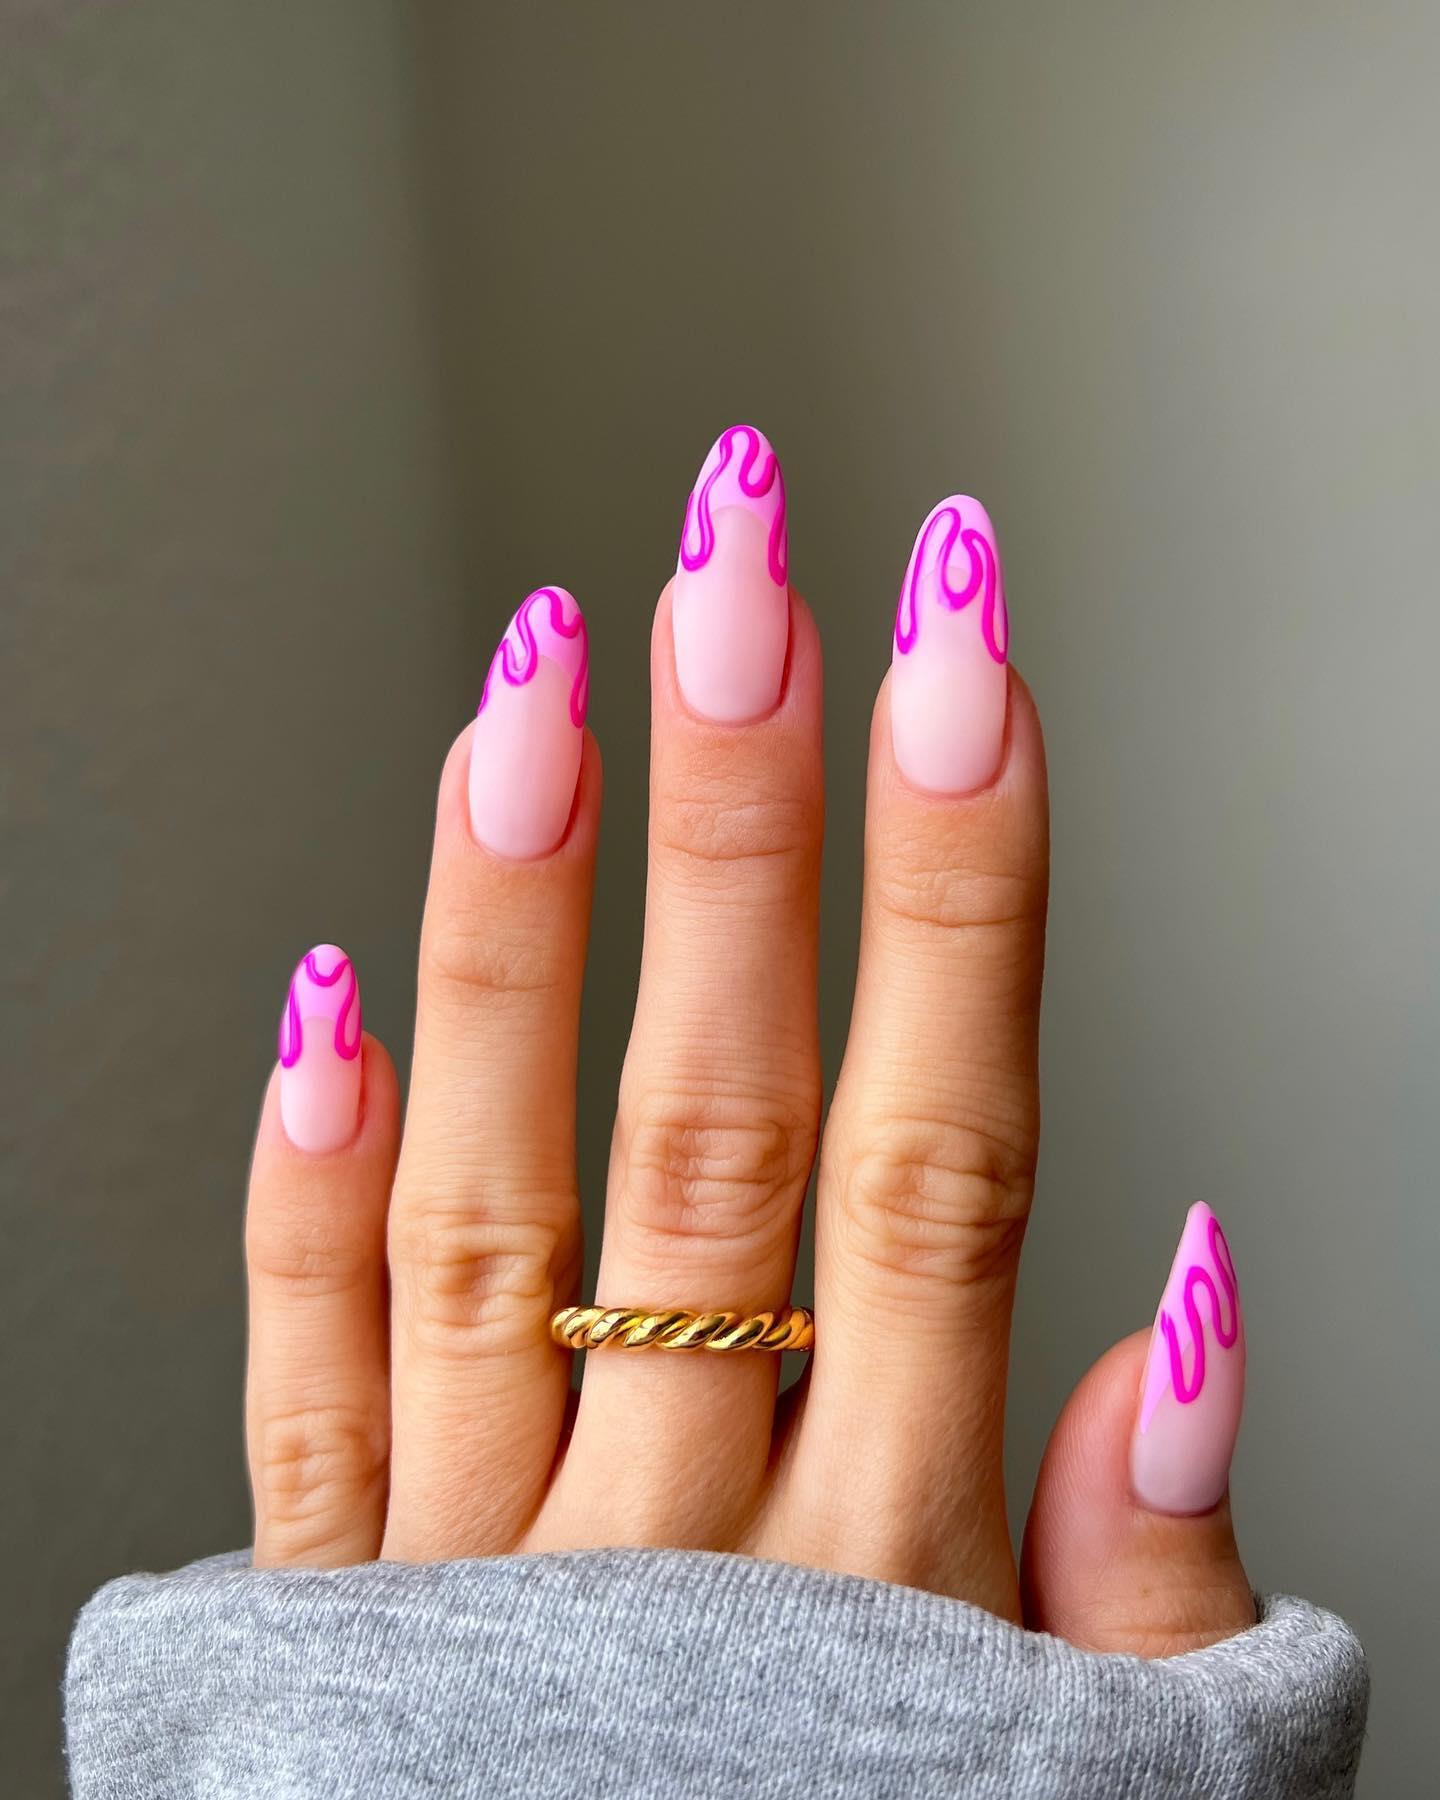 Summer Almond Nails: The Perfect Accessory for the Season